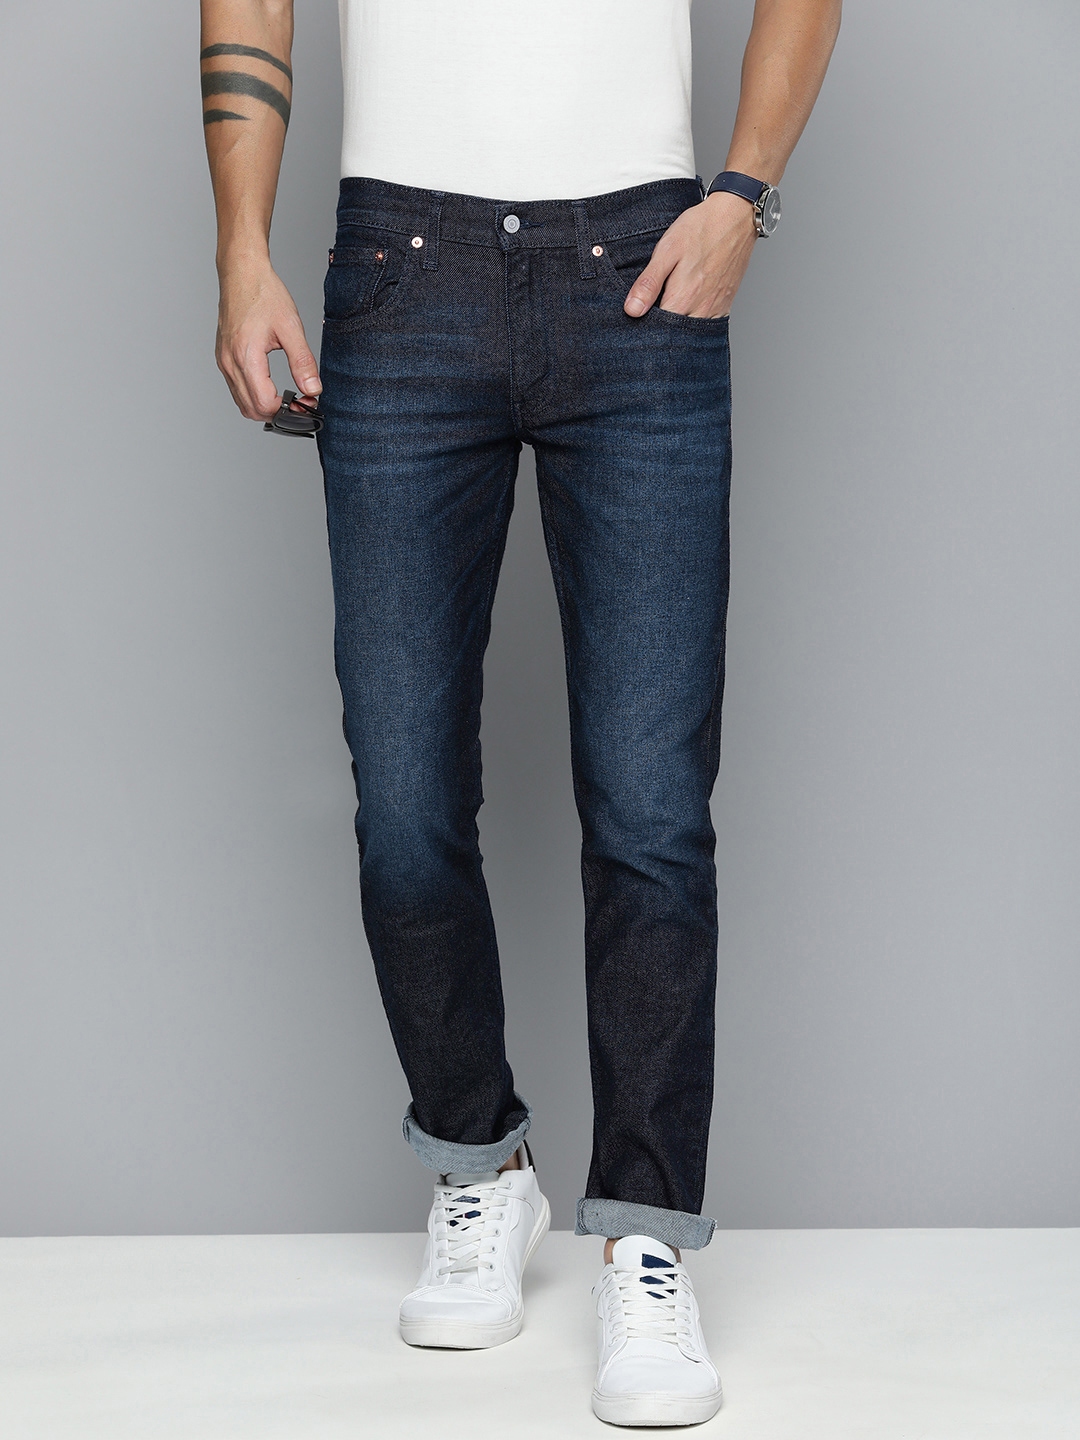 Buy Levis Men 65504 Skinny Fit Light Fade Stretchable Mid Rise Jeans ...